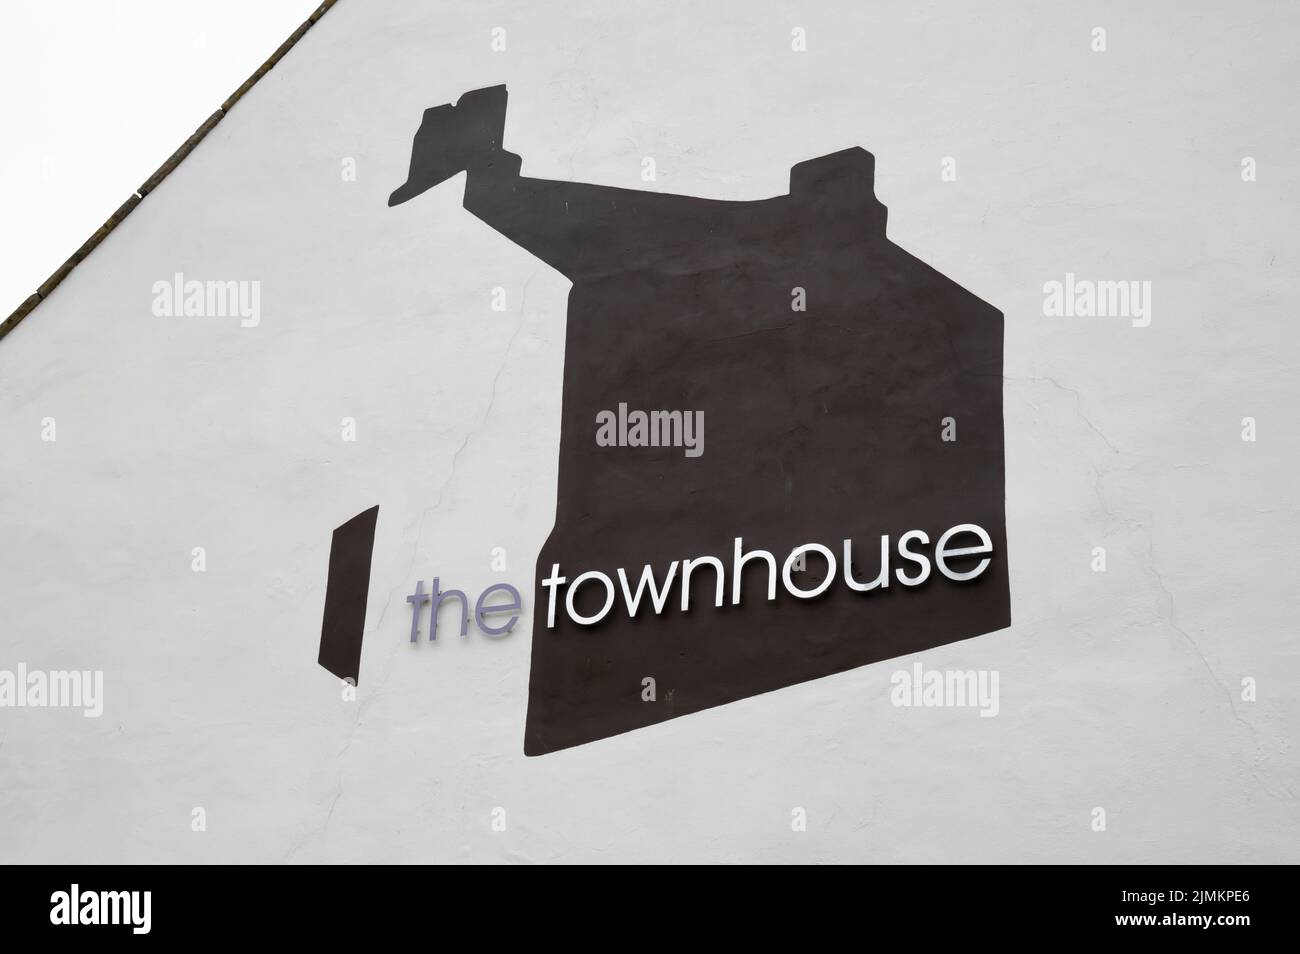 Beaumaris, UK- July 8, 2022: The sign for The Townhouse hotel in Beaumaris on the island of Anglesey Wales Stock Photo